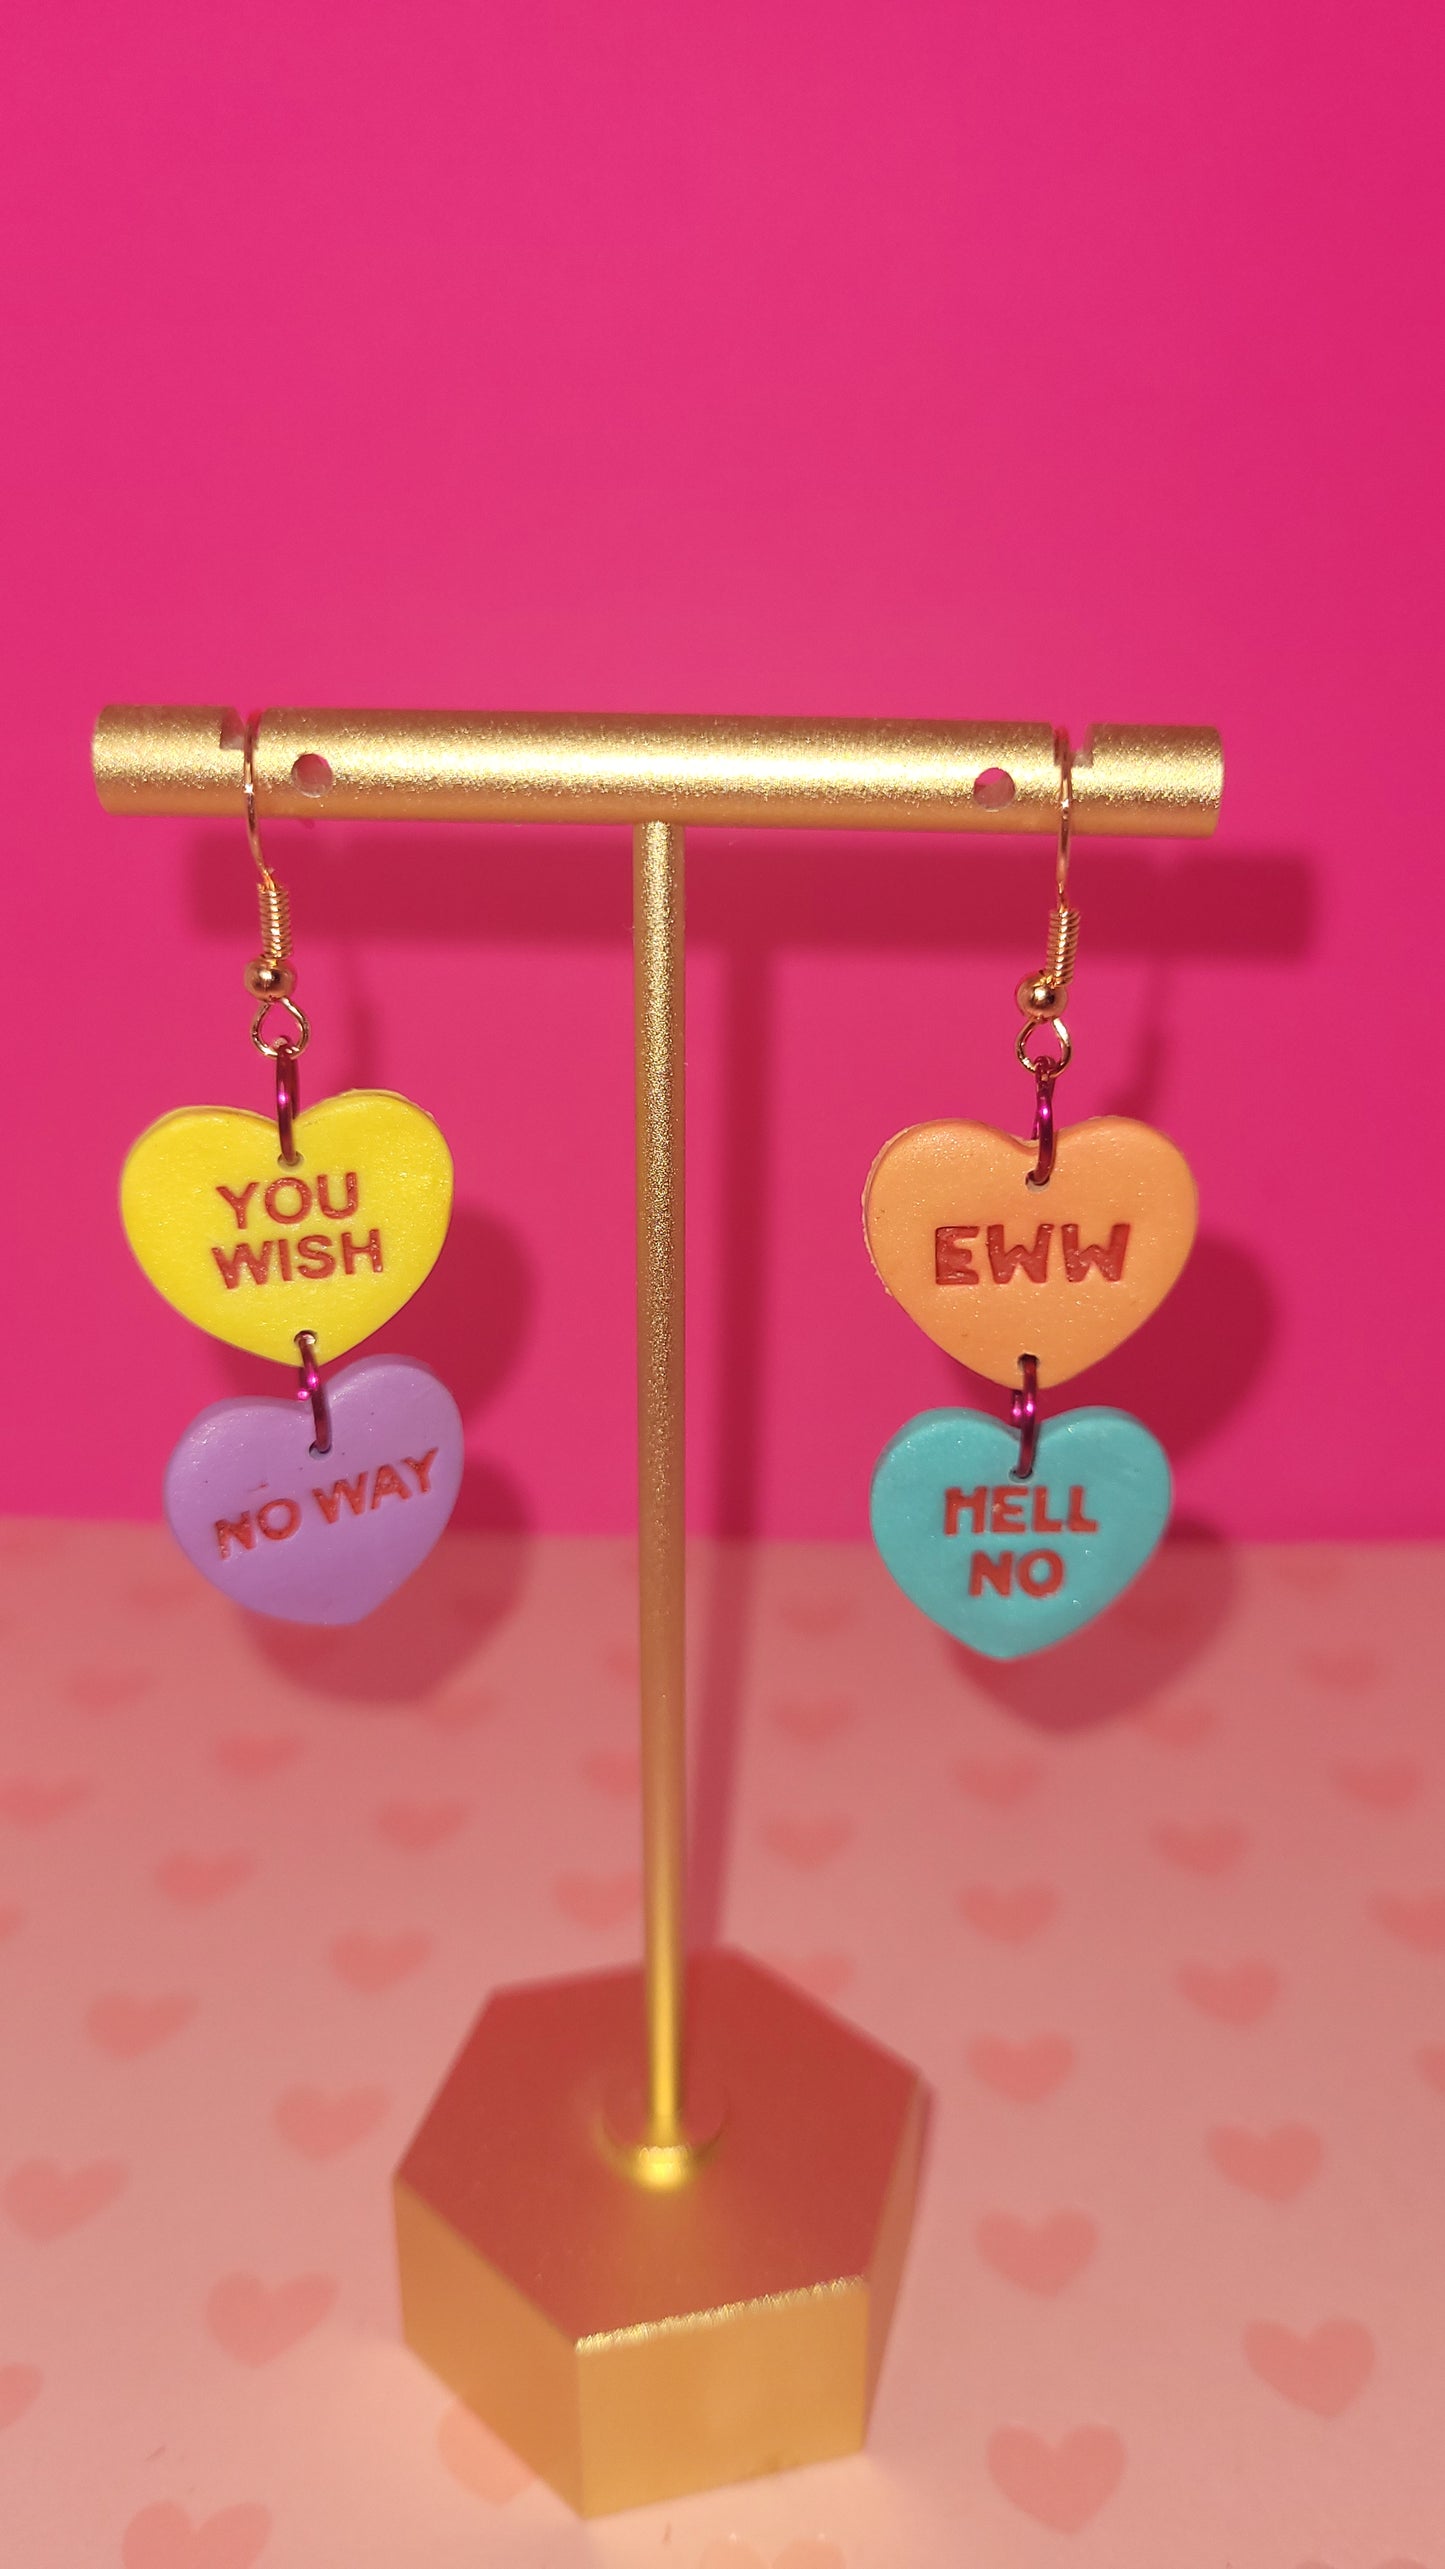 Snarky Anti-Valentine's Candy Hearts Dangle Earrings